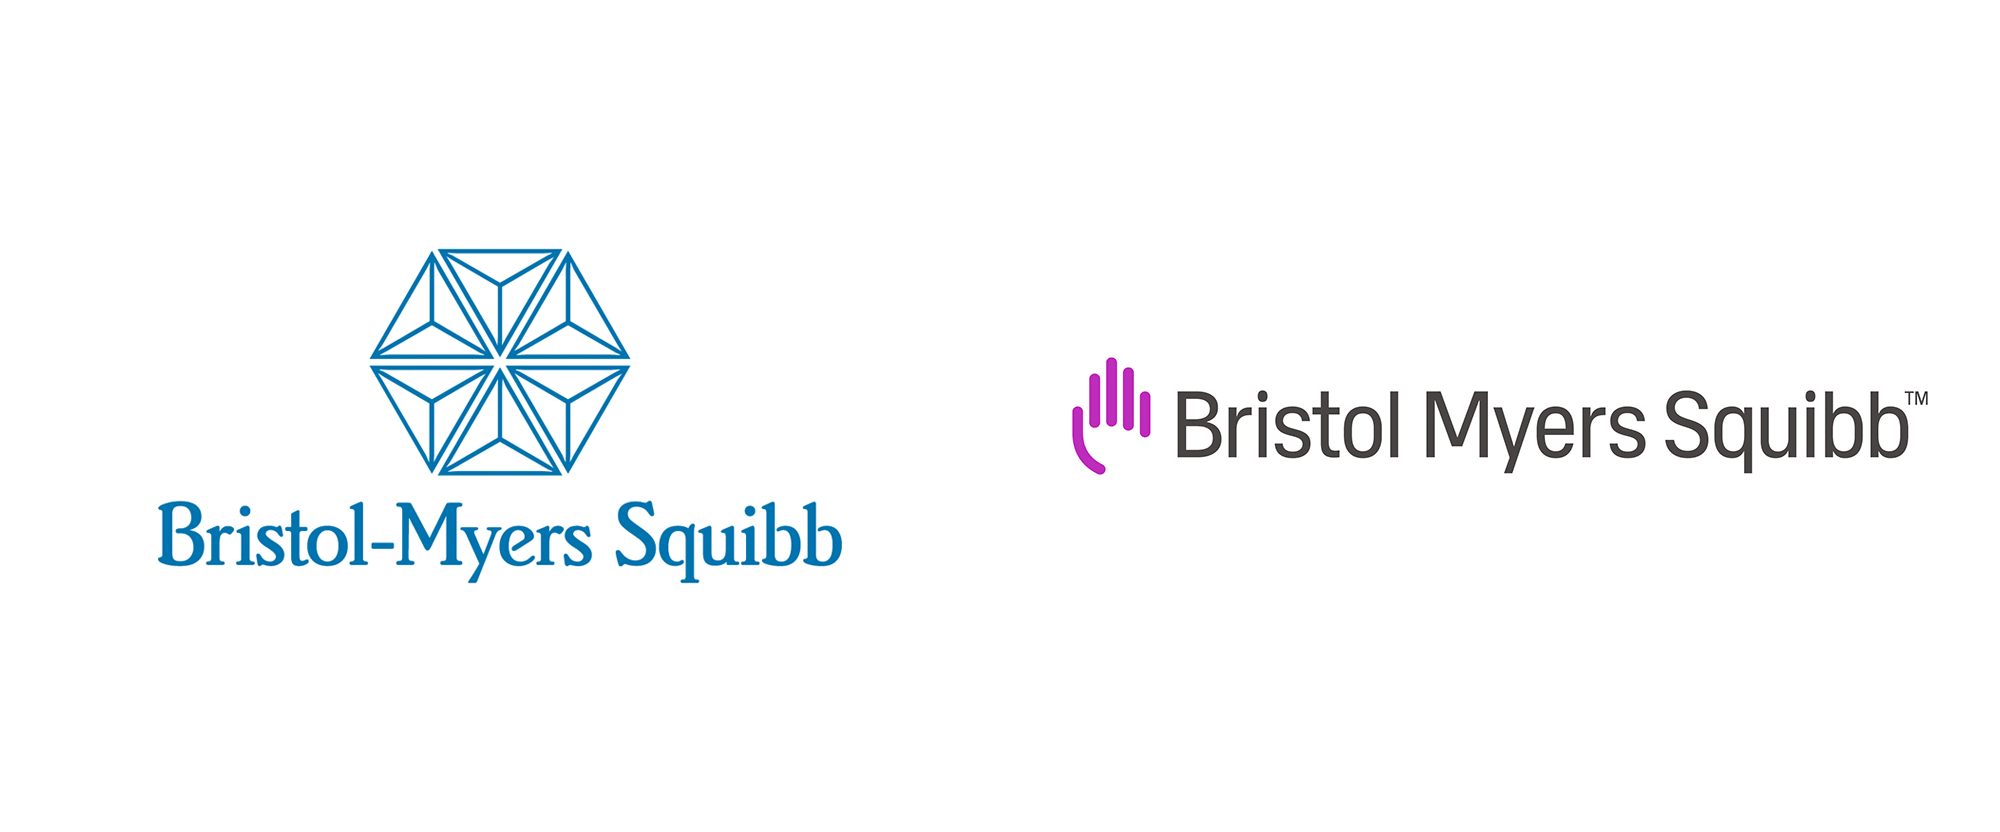 New Logo and Identity for Bristol Myers Squibb by Siegel+Gale